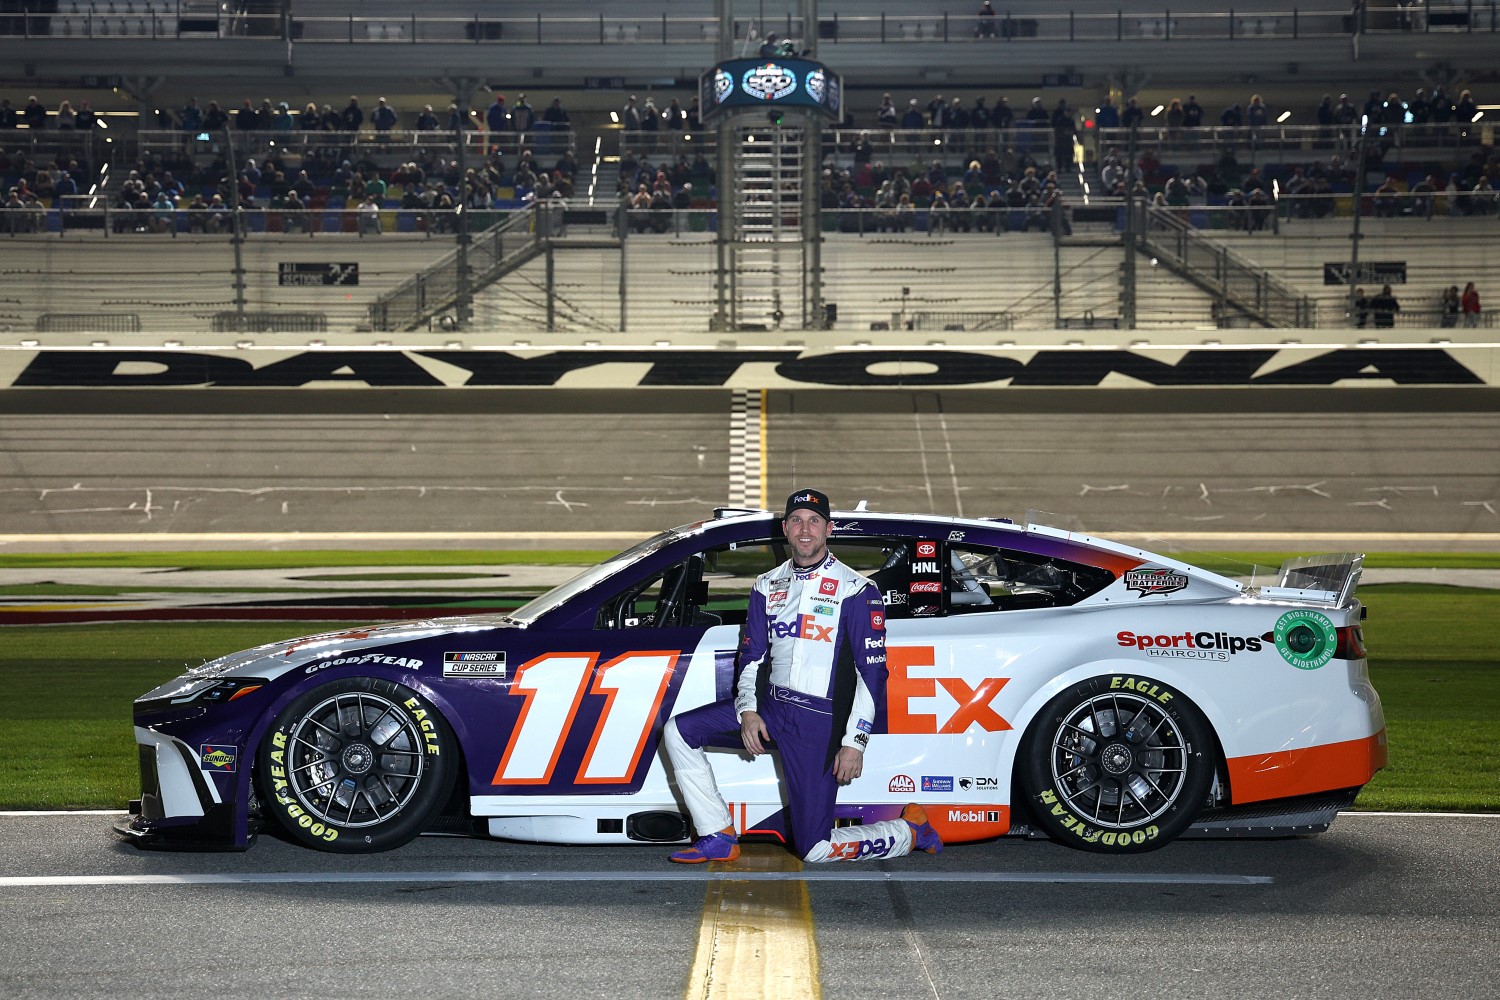 Denny Hamlin, driver of the #11 FedEx Toyota, poses for a photo on the grid during qualifying for the NASCAR Cup Series Daytona 500 at Daytona International Speedway on February 14, 2024 in Daytona Beach, Florida. (Photo by Jared C. Tilton/Getty Images)